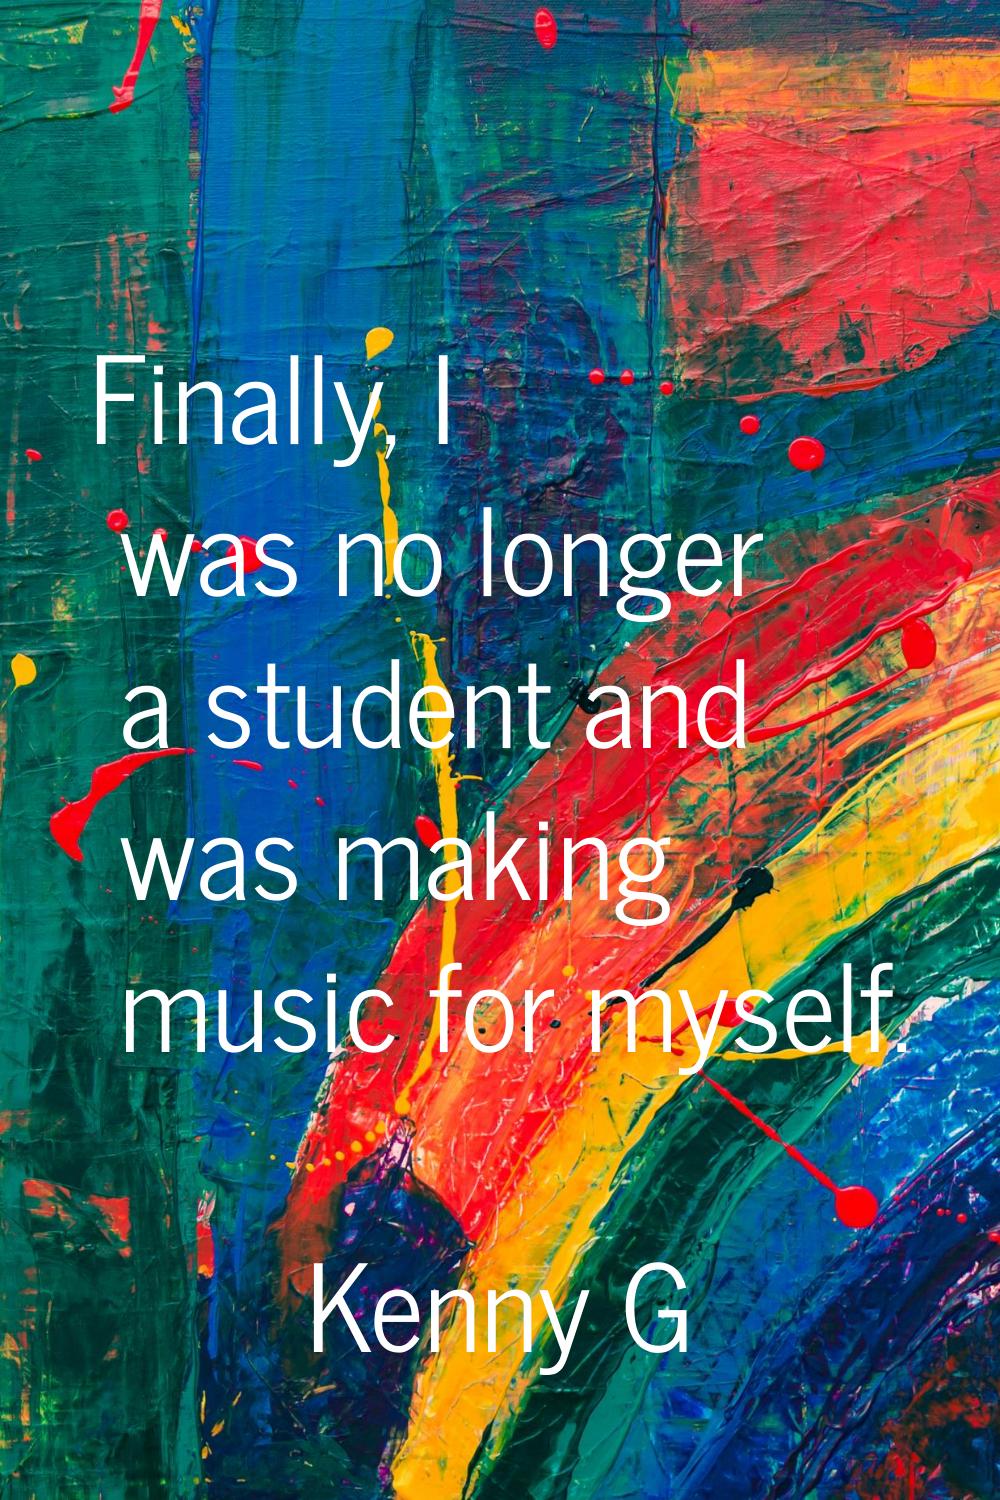 Finally, I was no longer a student and was making music for myself.